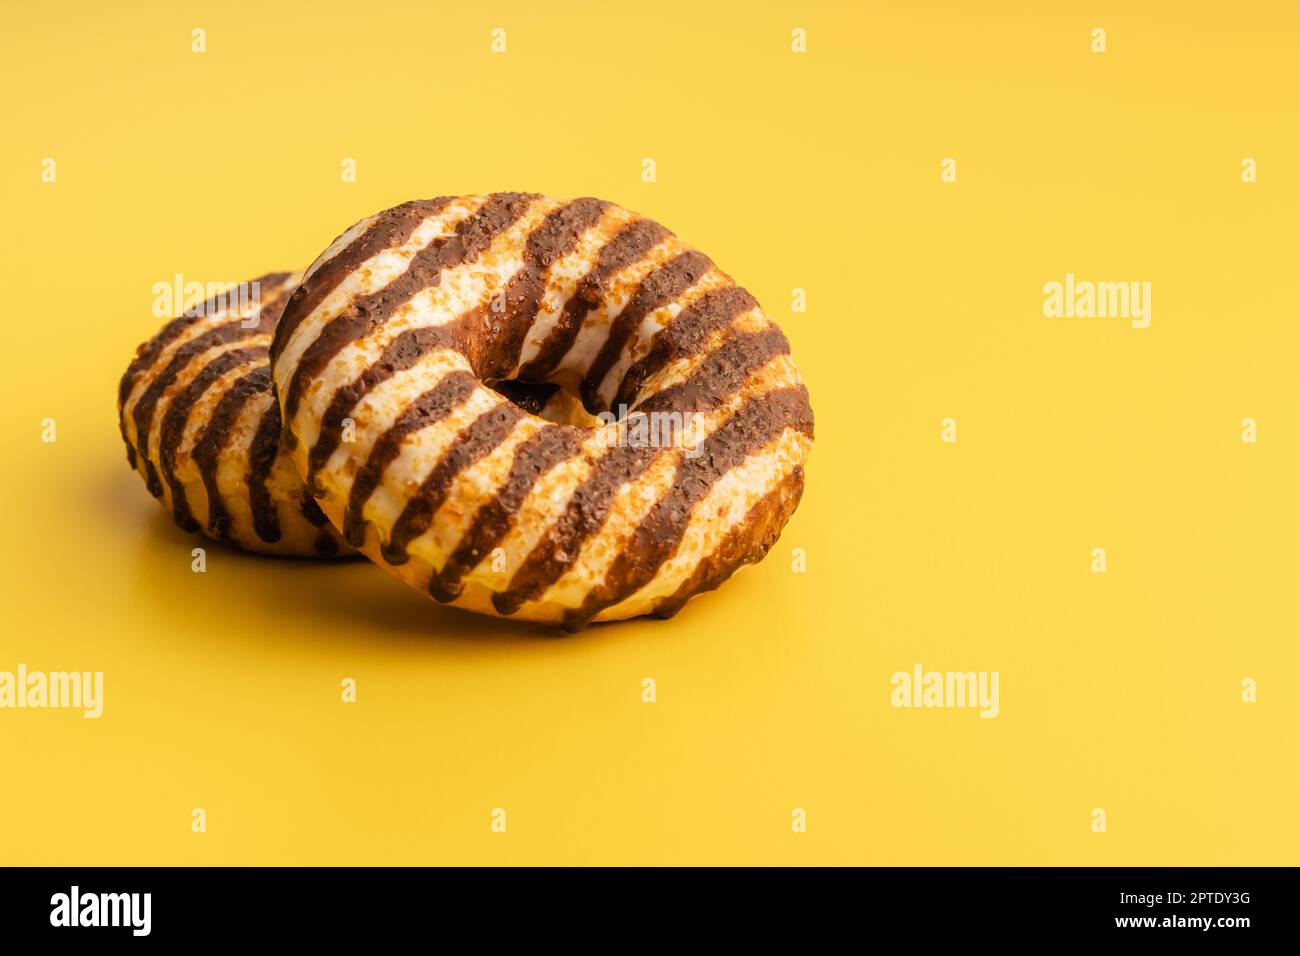 Donut with chocolate and caramel icing on the yellow background. Stock Photo